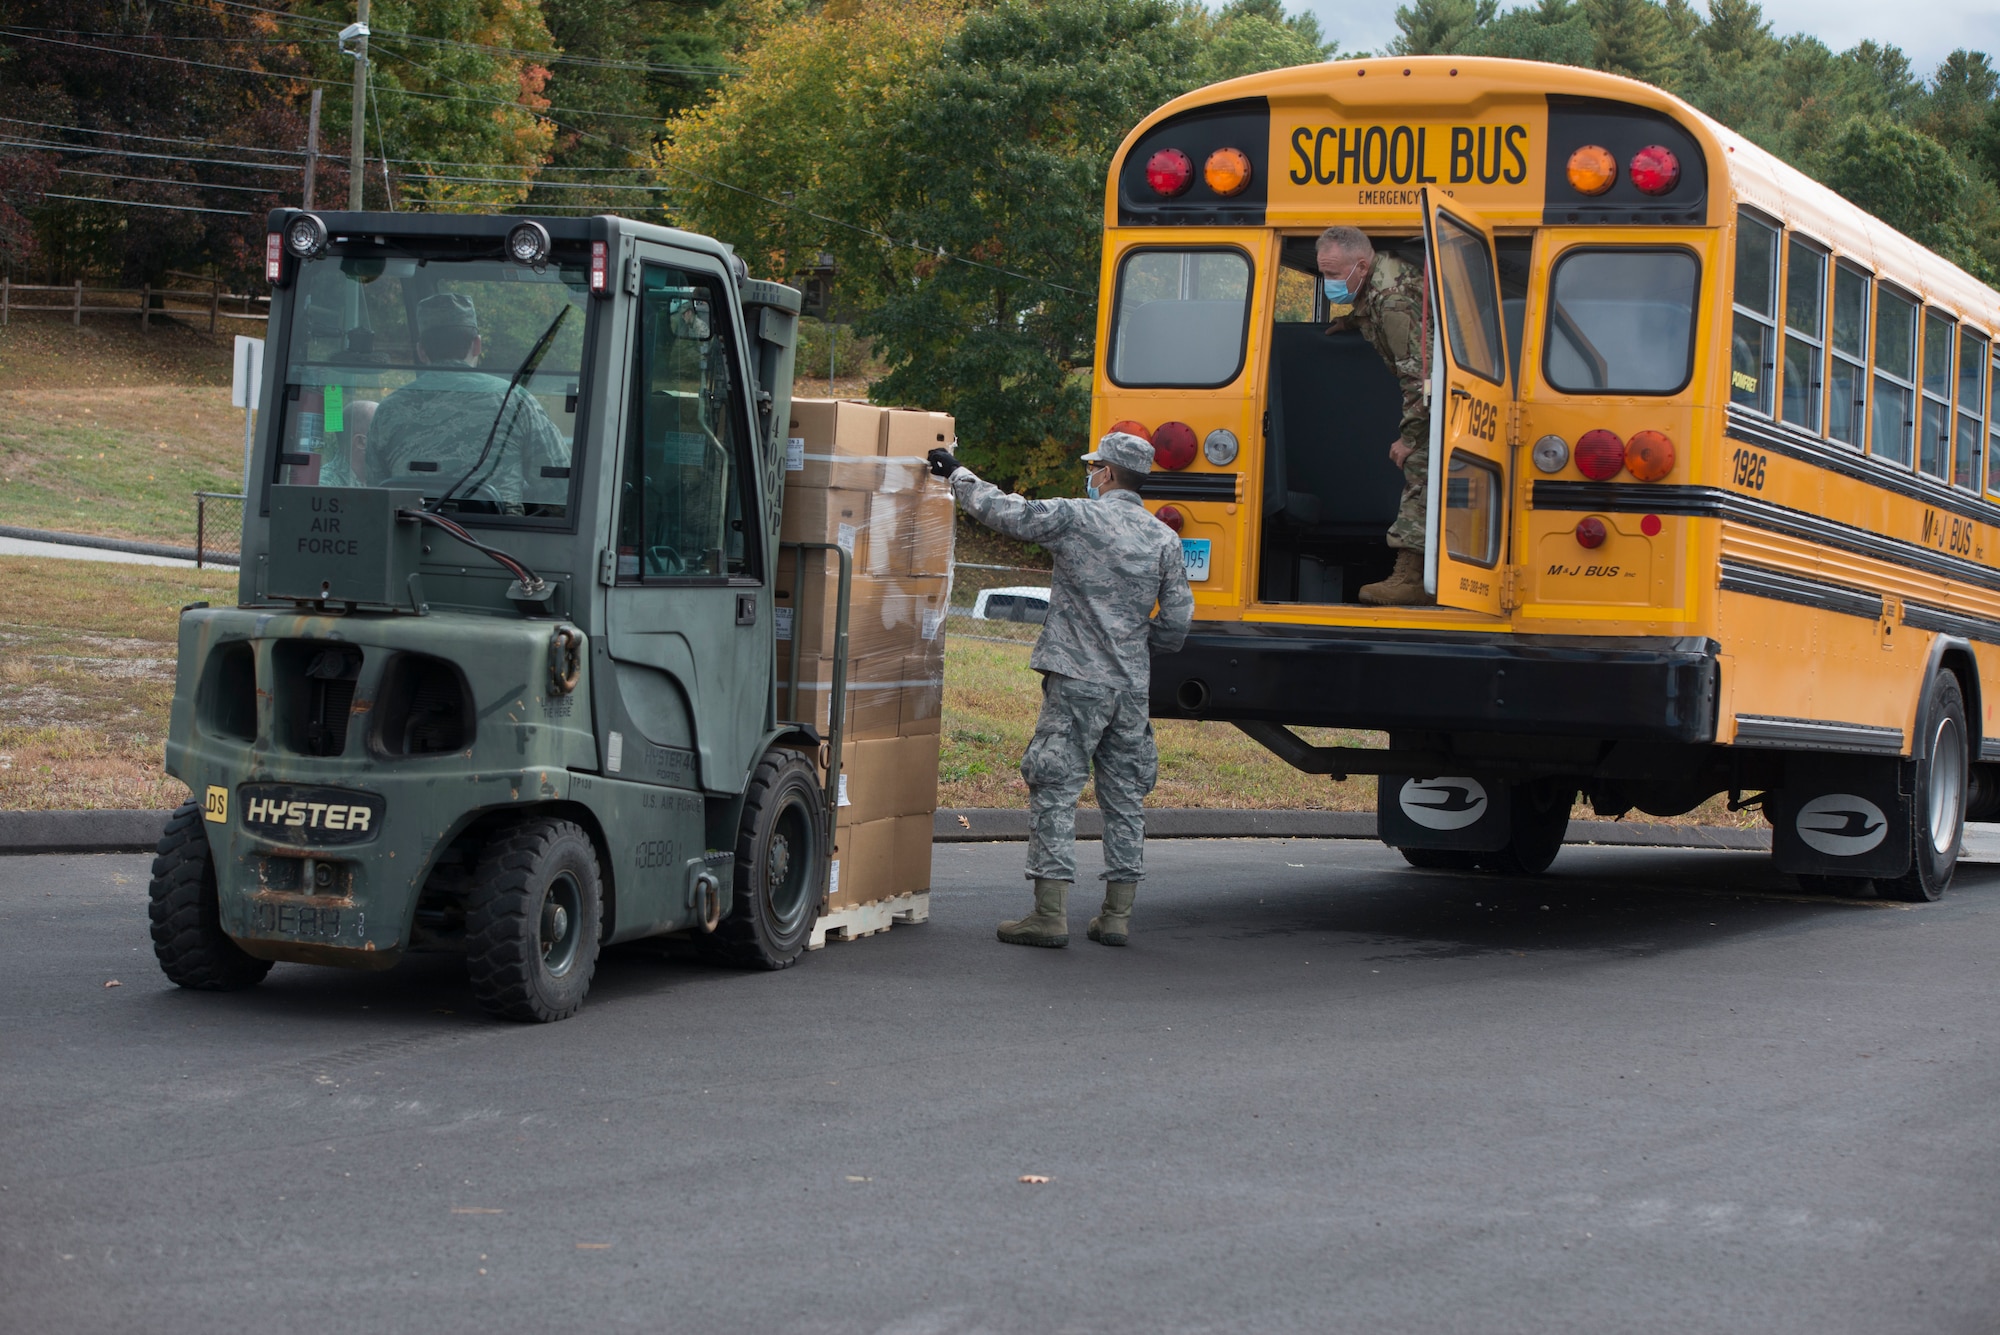 Members of the Connecticut Air National Guard, 103rd Logistics Readiness Squadron load Farmers to Families Food Boxes onto a school bus at the Killingly Highway Department in Dayville, Connecticut, September 30, 2020. The boxes were going to be  delivered to homes and food pantries. (U.S. Air National Guard photo by Tech. Sgt. Tamara R. Dabney)